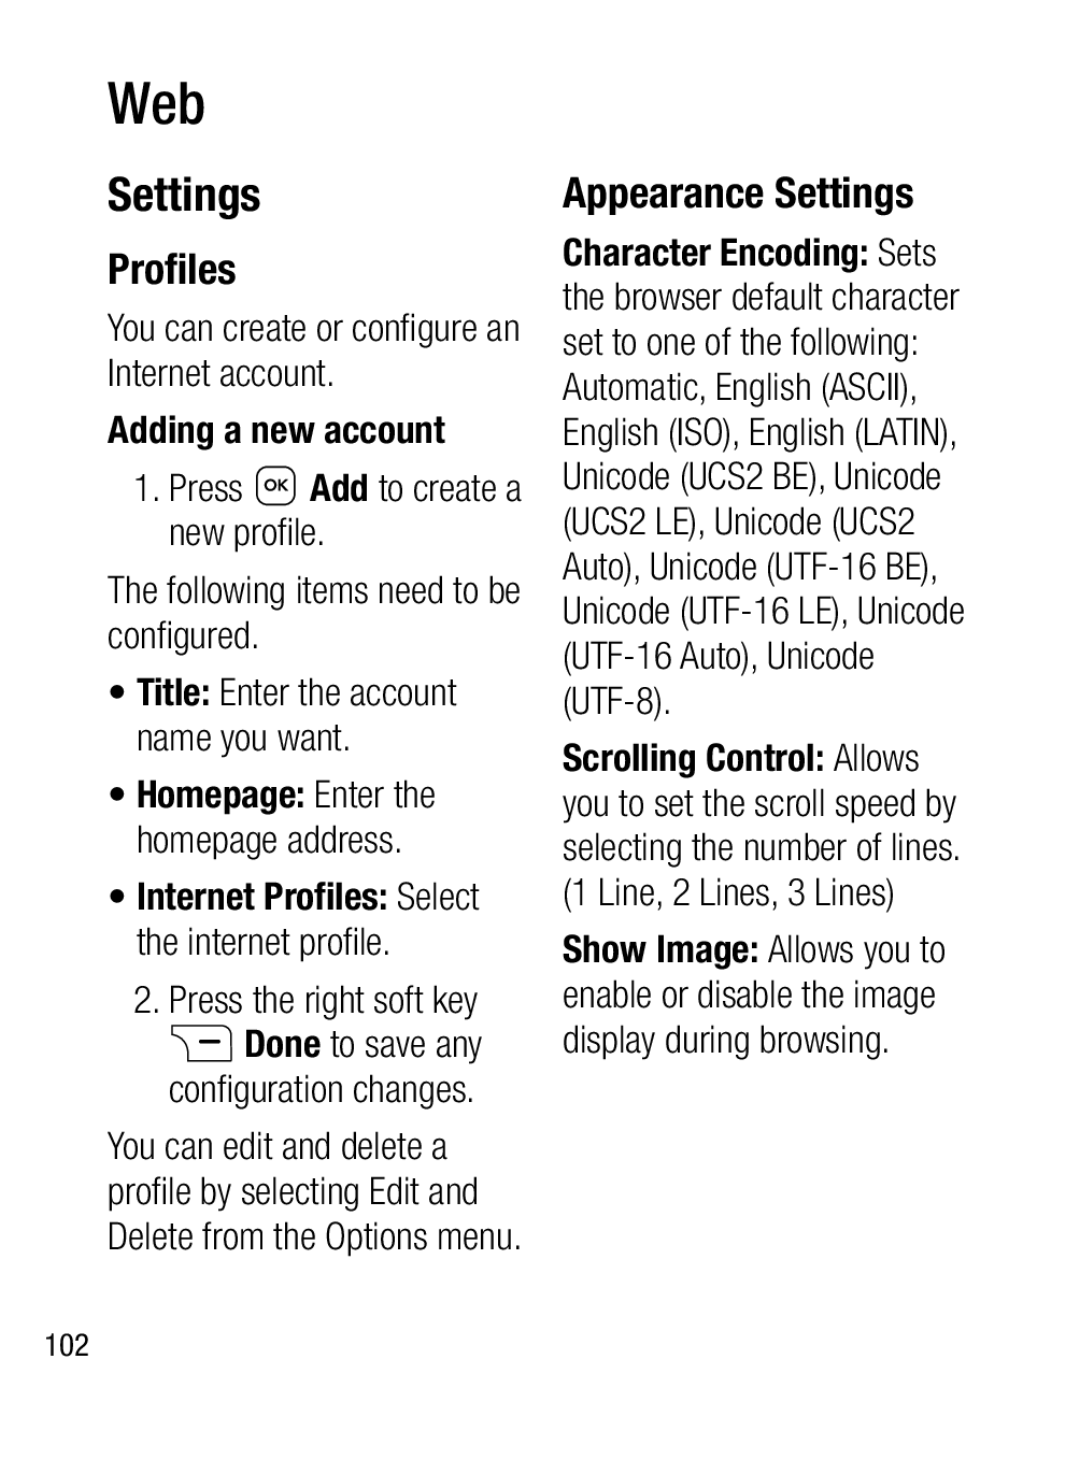 LG Electronics A133CH Proﬁles, Appearance Settings, You can create or conﬁ gure an Internet account Adding a new account 